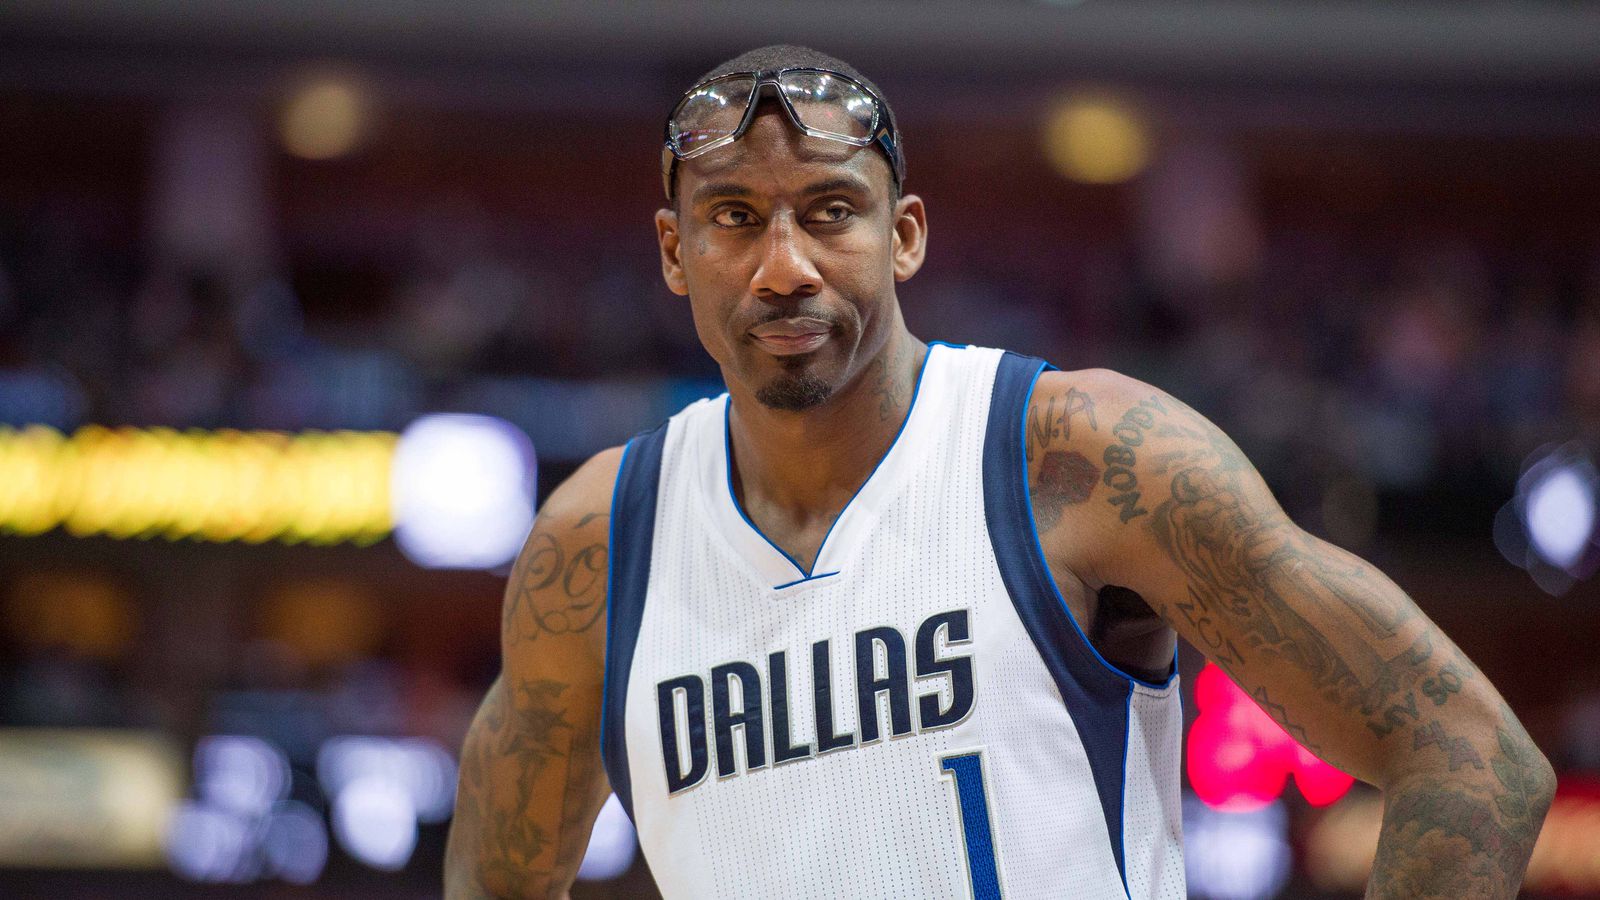 Amar'e Stoudemire signs with the Heat.